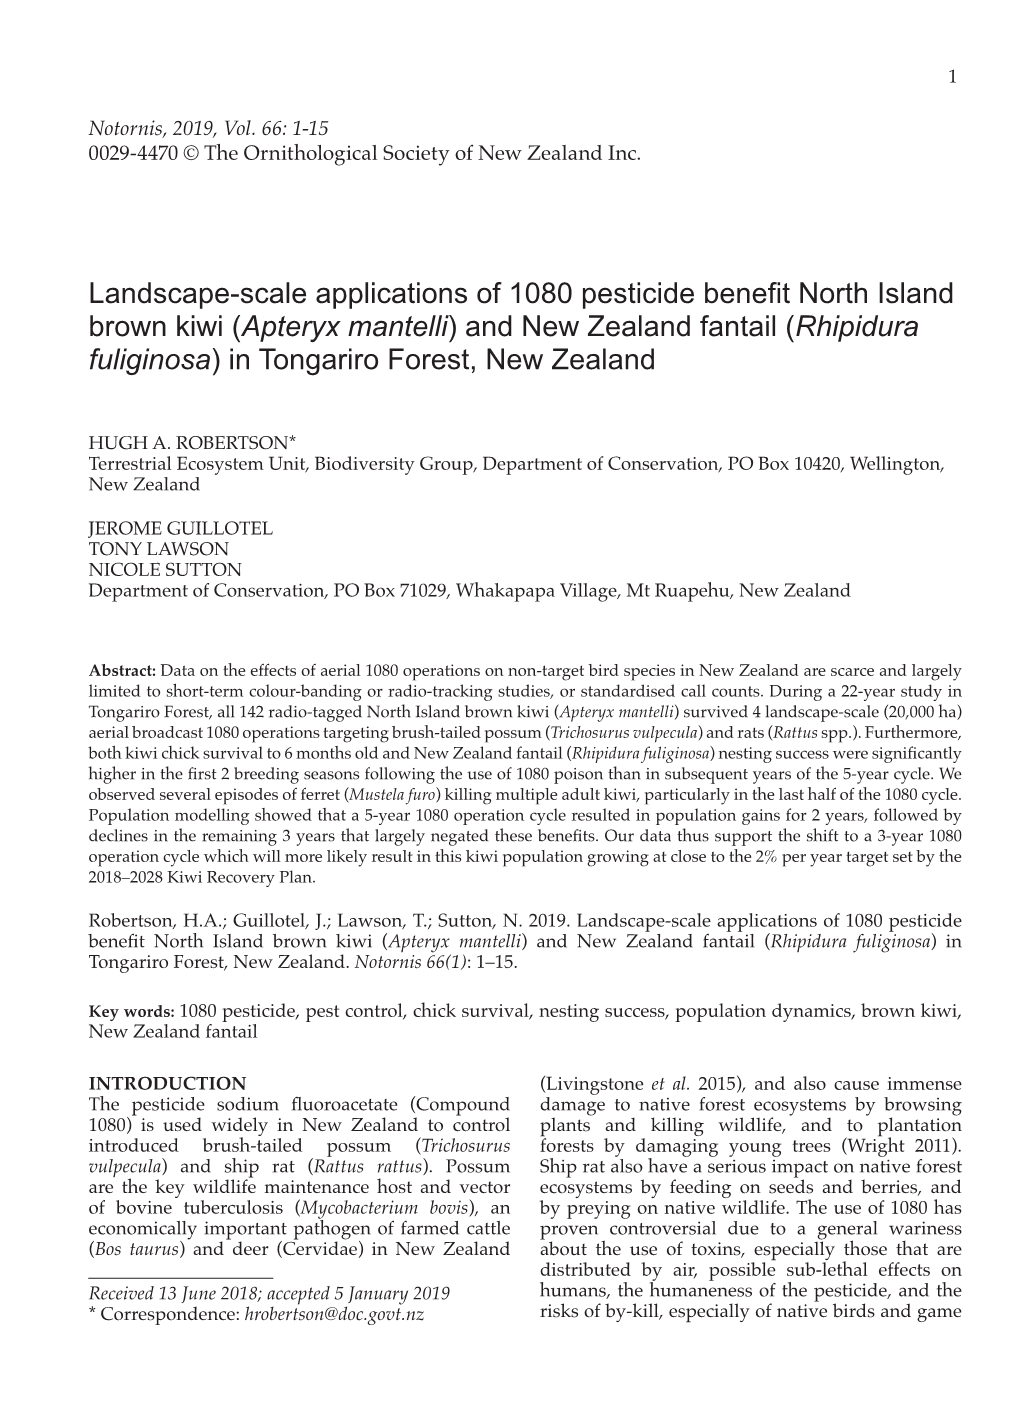 Landscape-Scale Applications of 1080 Pesticide Benefit North Island